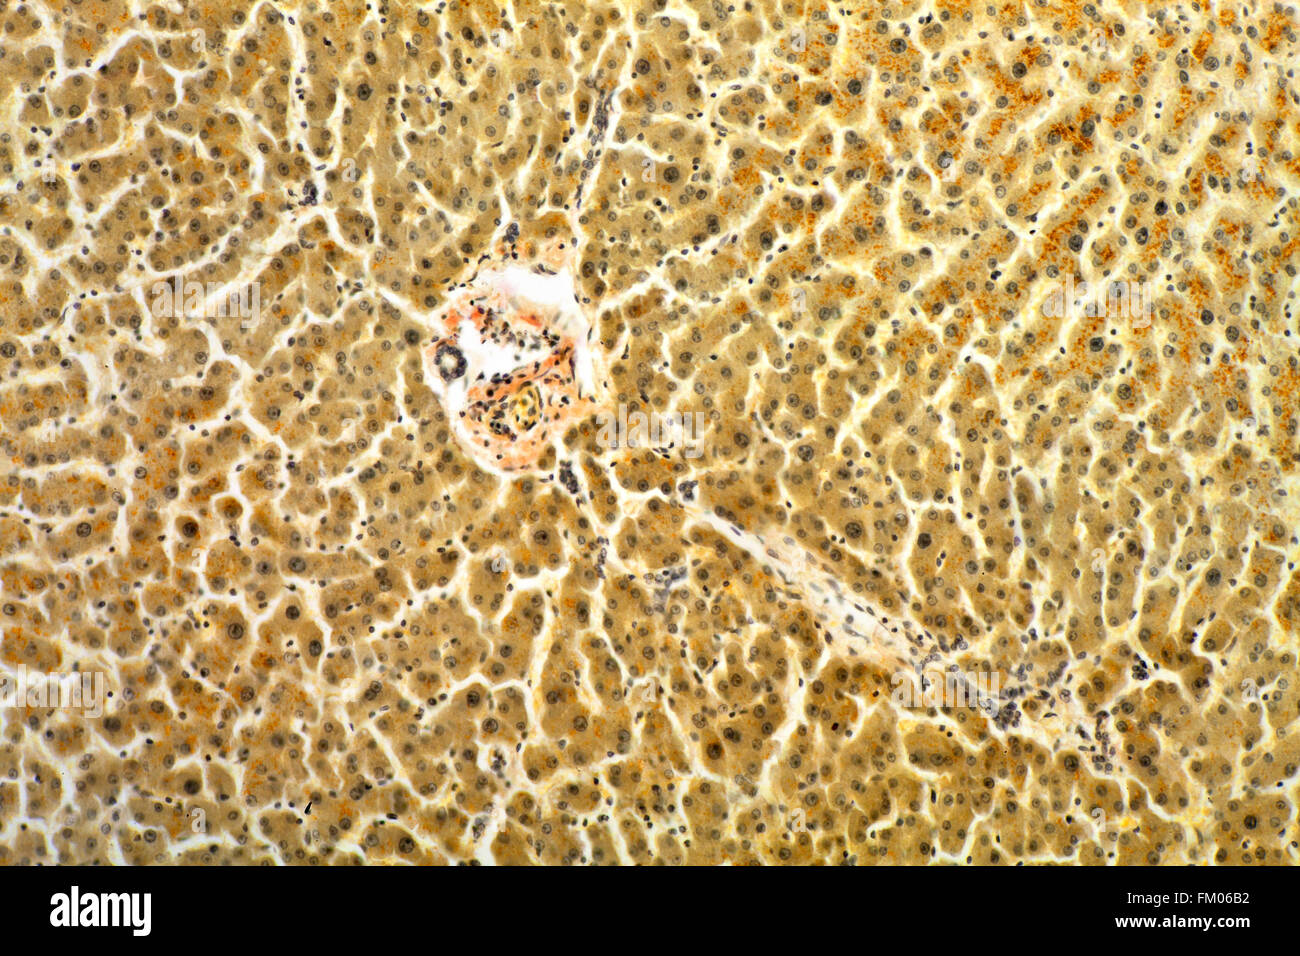 Liver stained slide section, brightfield photomicrograph Stock Photo